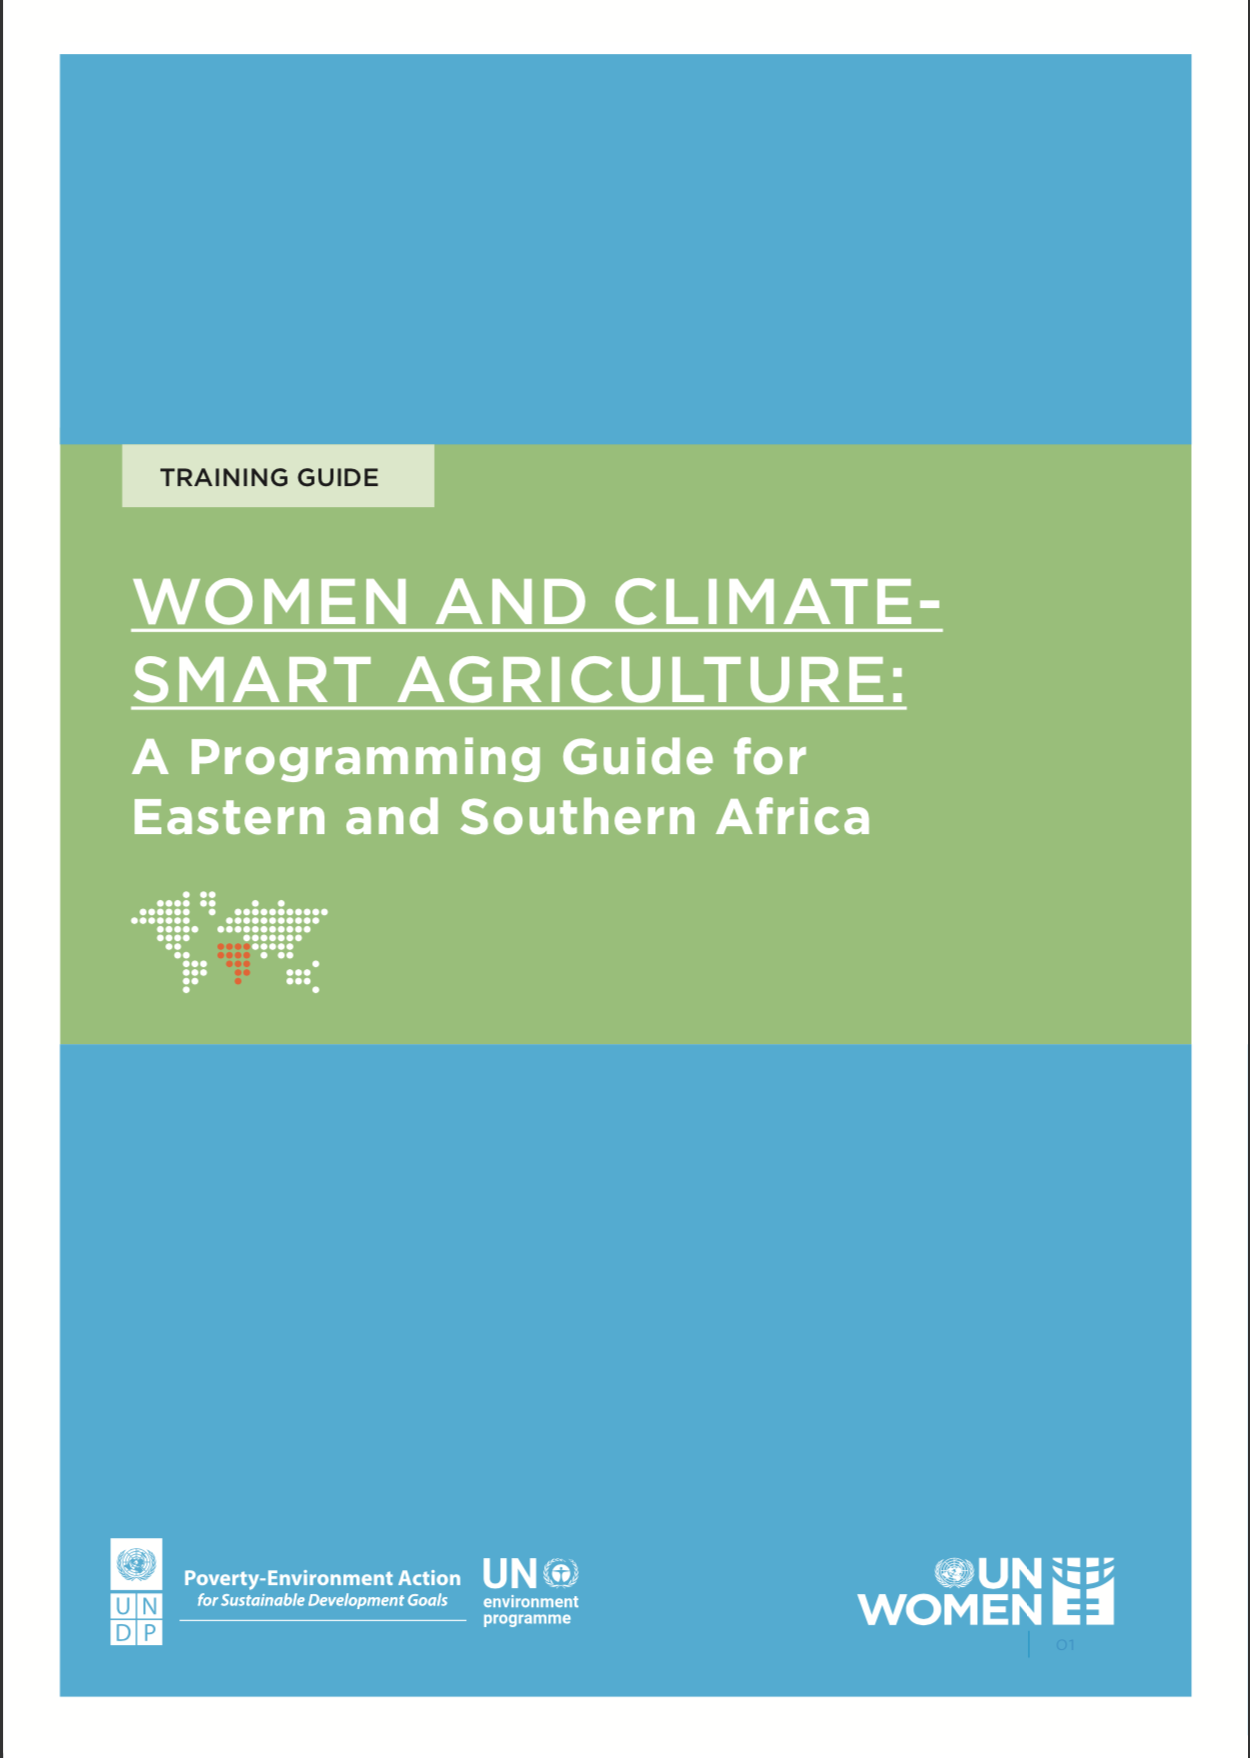 Women and Climate Smart Agriculture: A programming guide for Eastern and Southern Africa